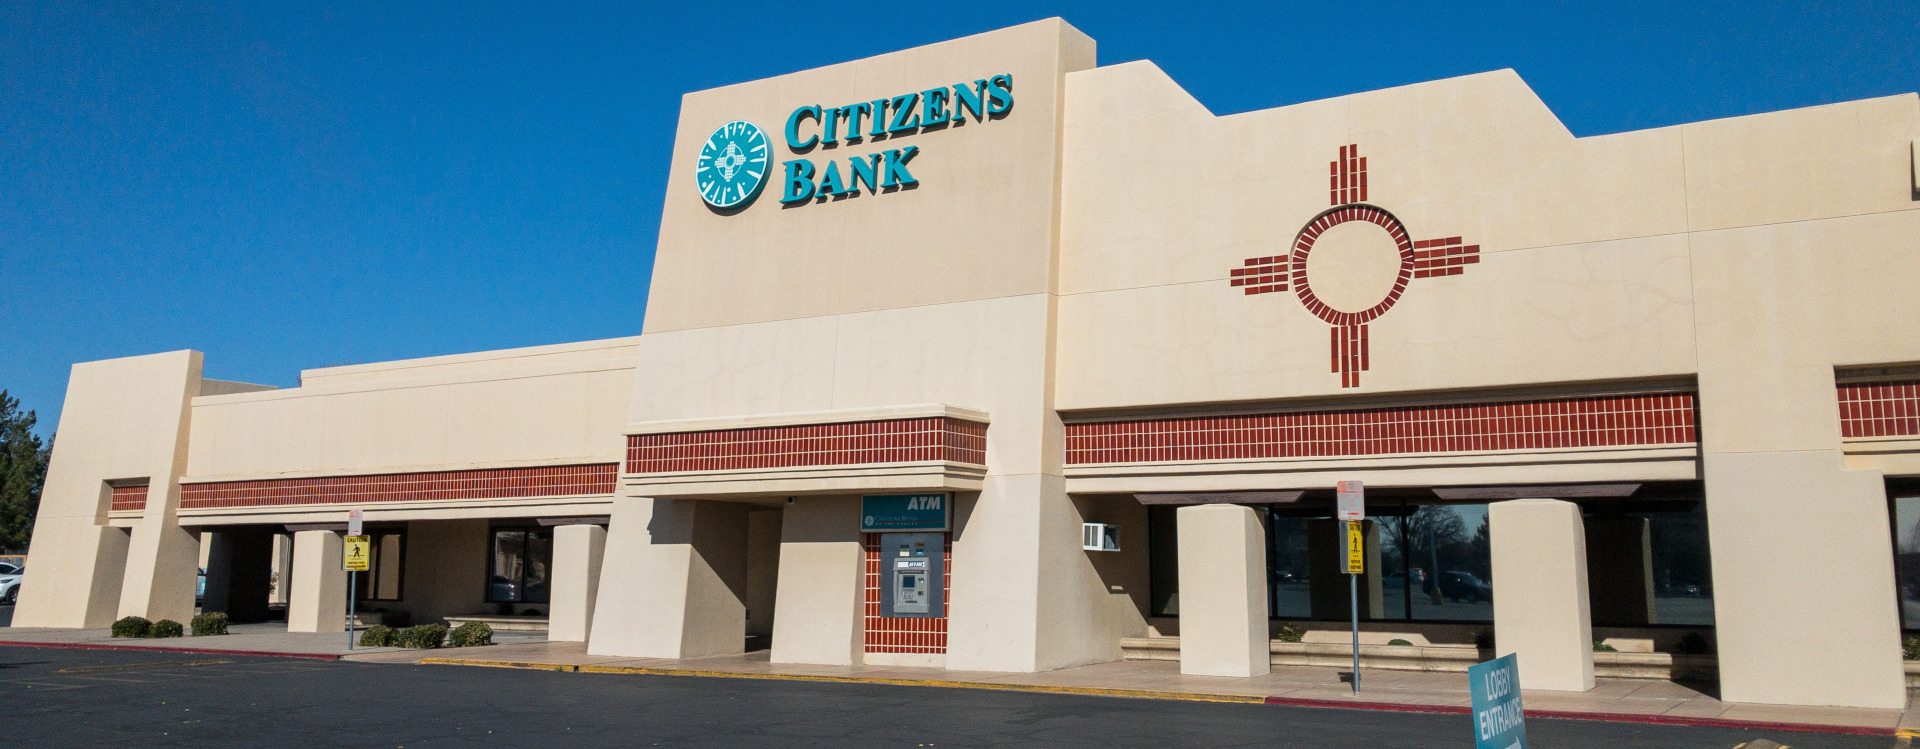 Citizens Bank of Las Cruces - Proud to be local | Business View Magazine